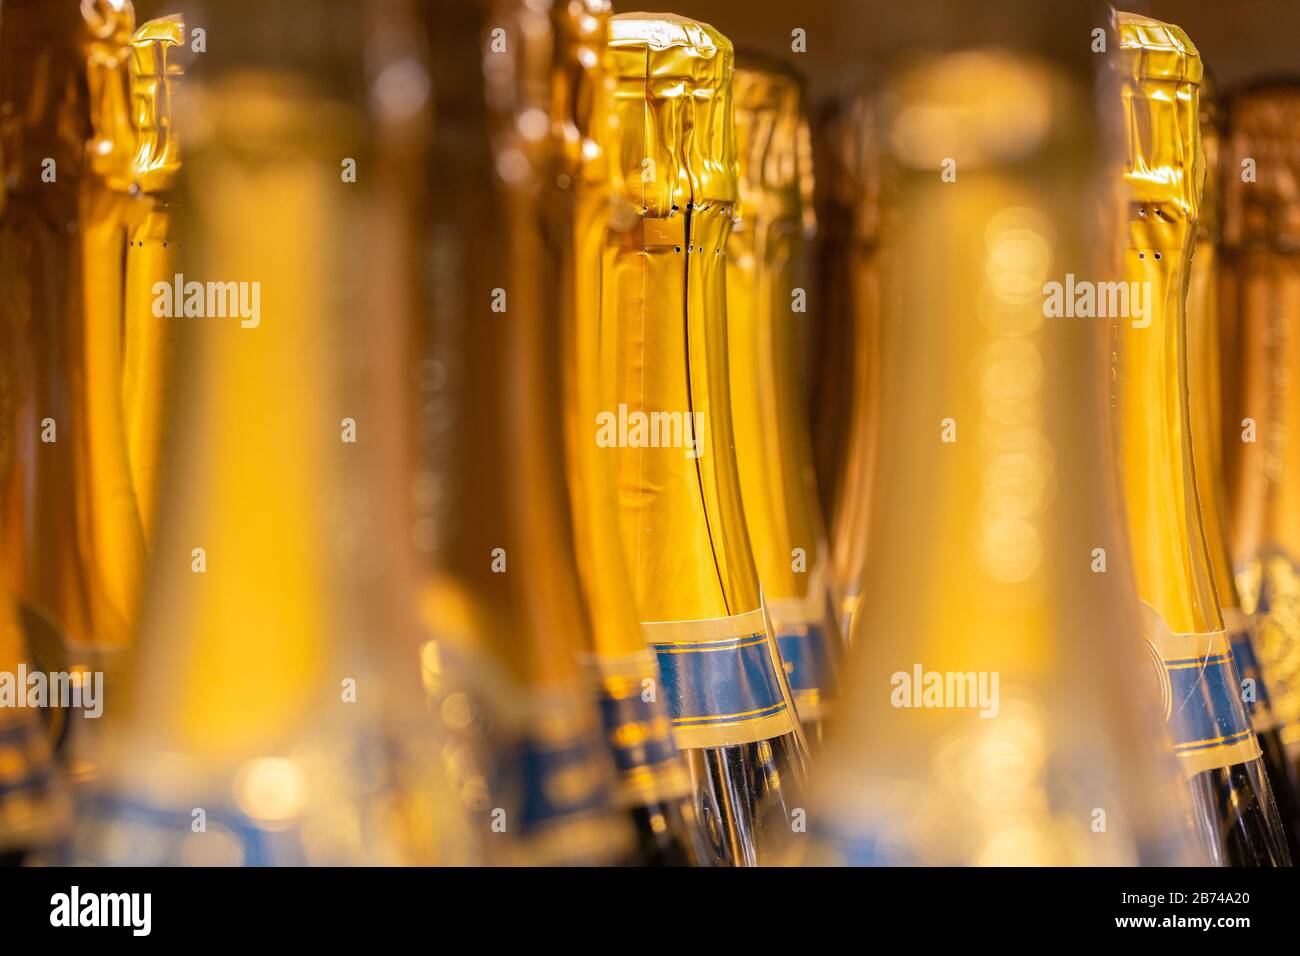 Close up of many / a group of sealed champagne / sparkling wine bottles. Golden colored foil with blue stripe. No logo. For celebration, party etc. Stock Photo